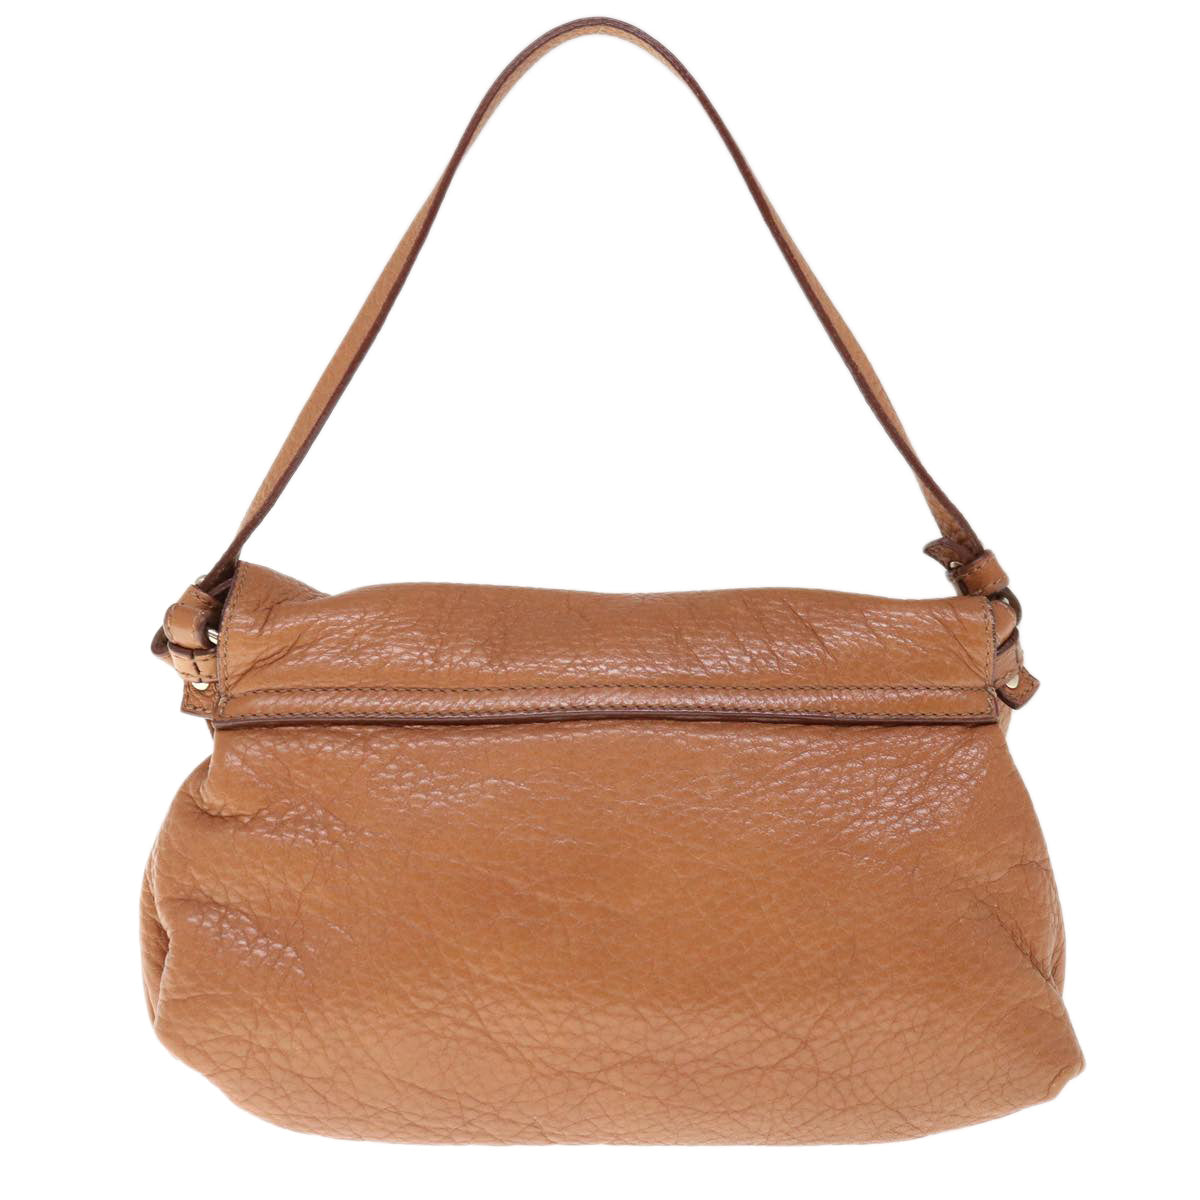 Chloe Lily Hand Bag Leather 2way Brown Auth yk10587